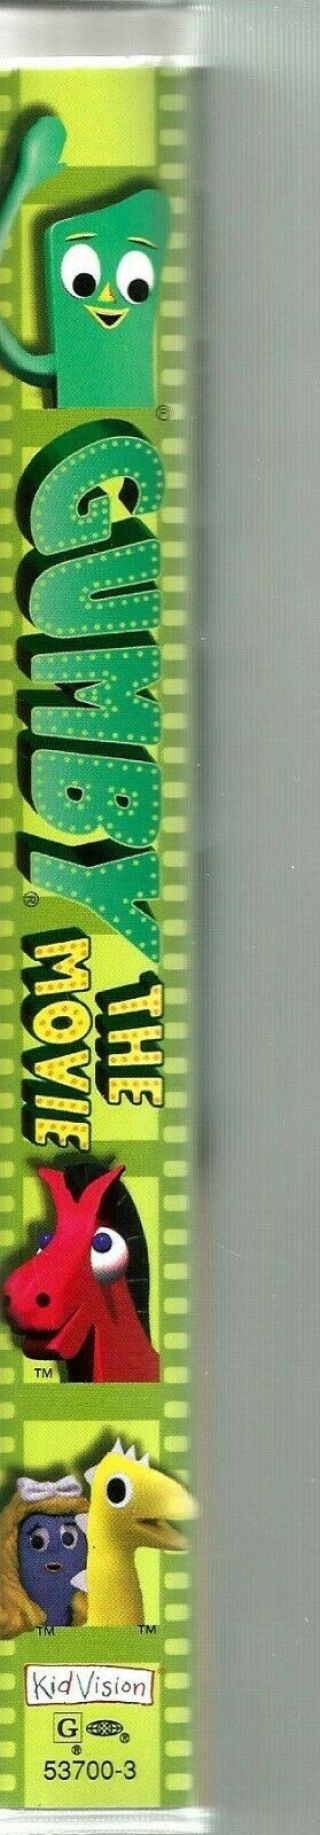 Gumby: The Movie VHS 1995 Claymation Charles Farrington Children Family Vintage 3